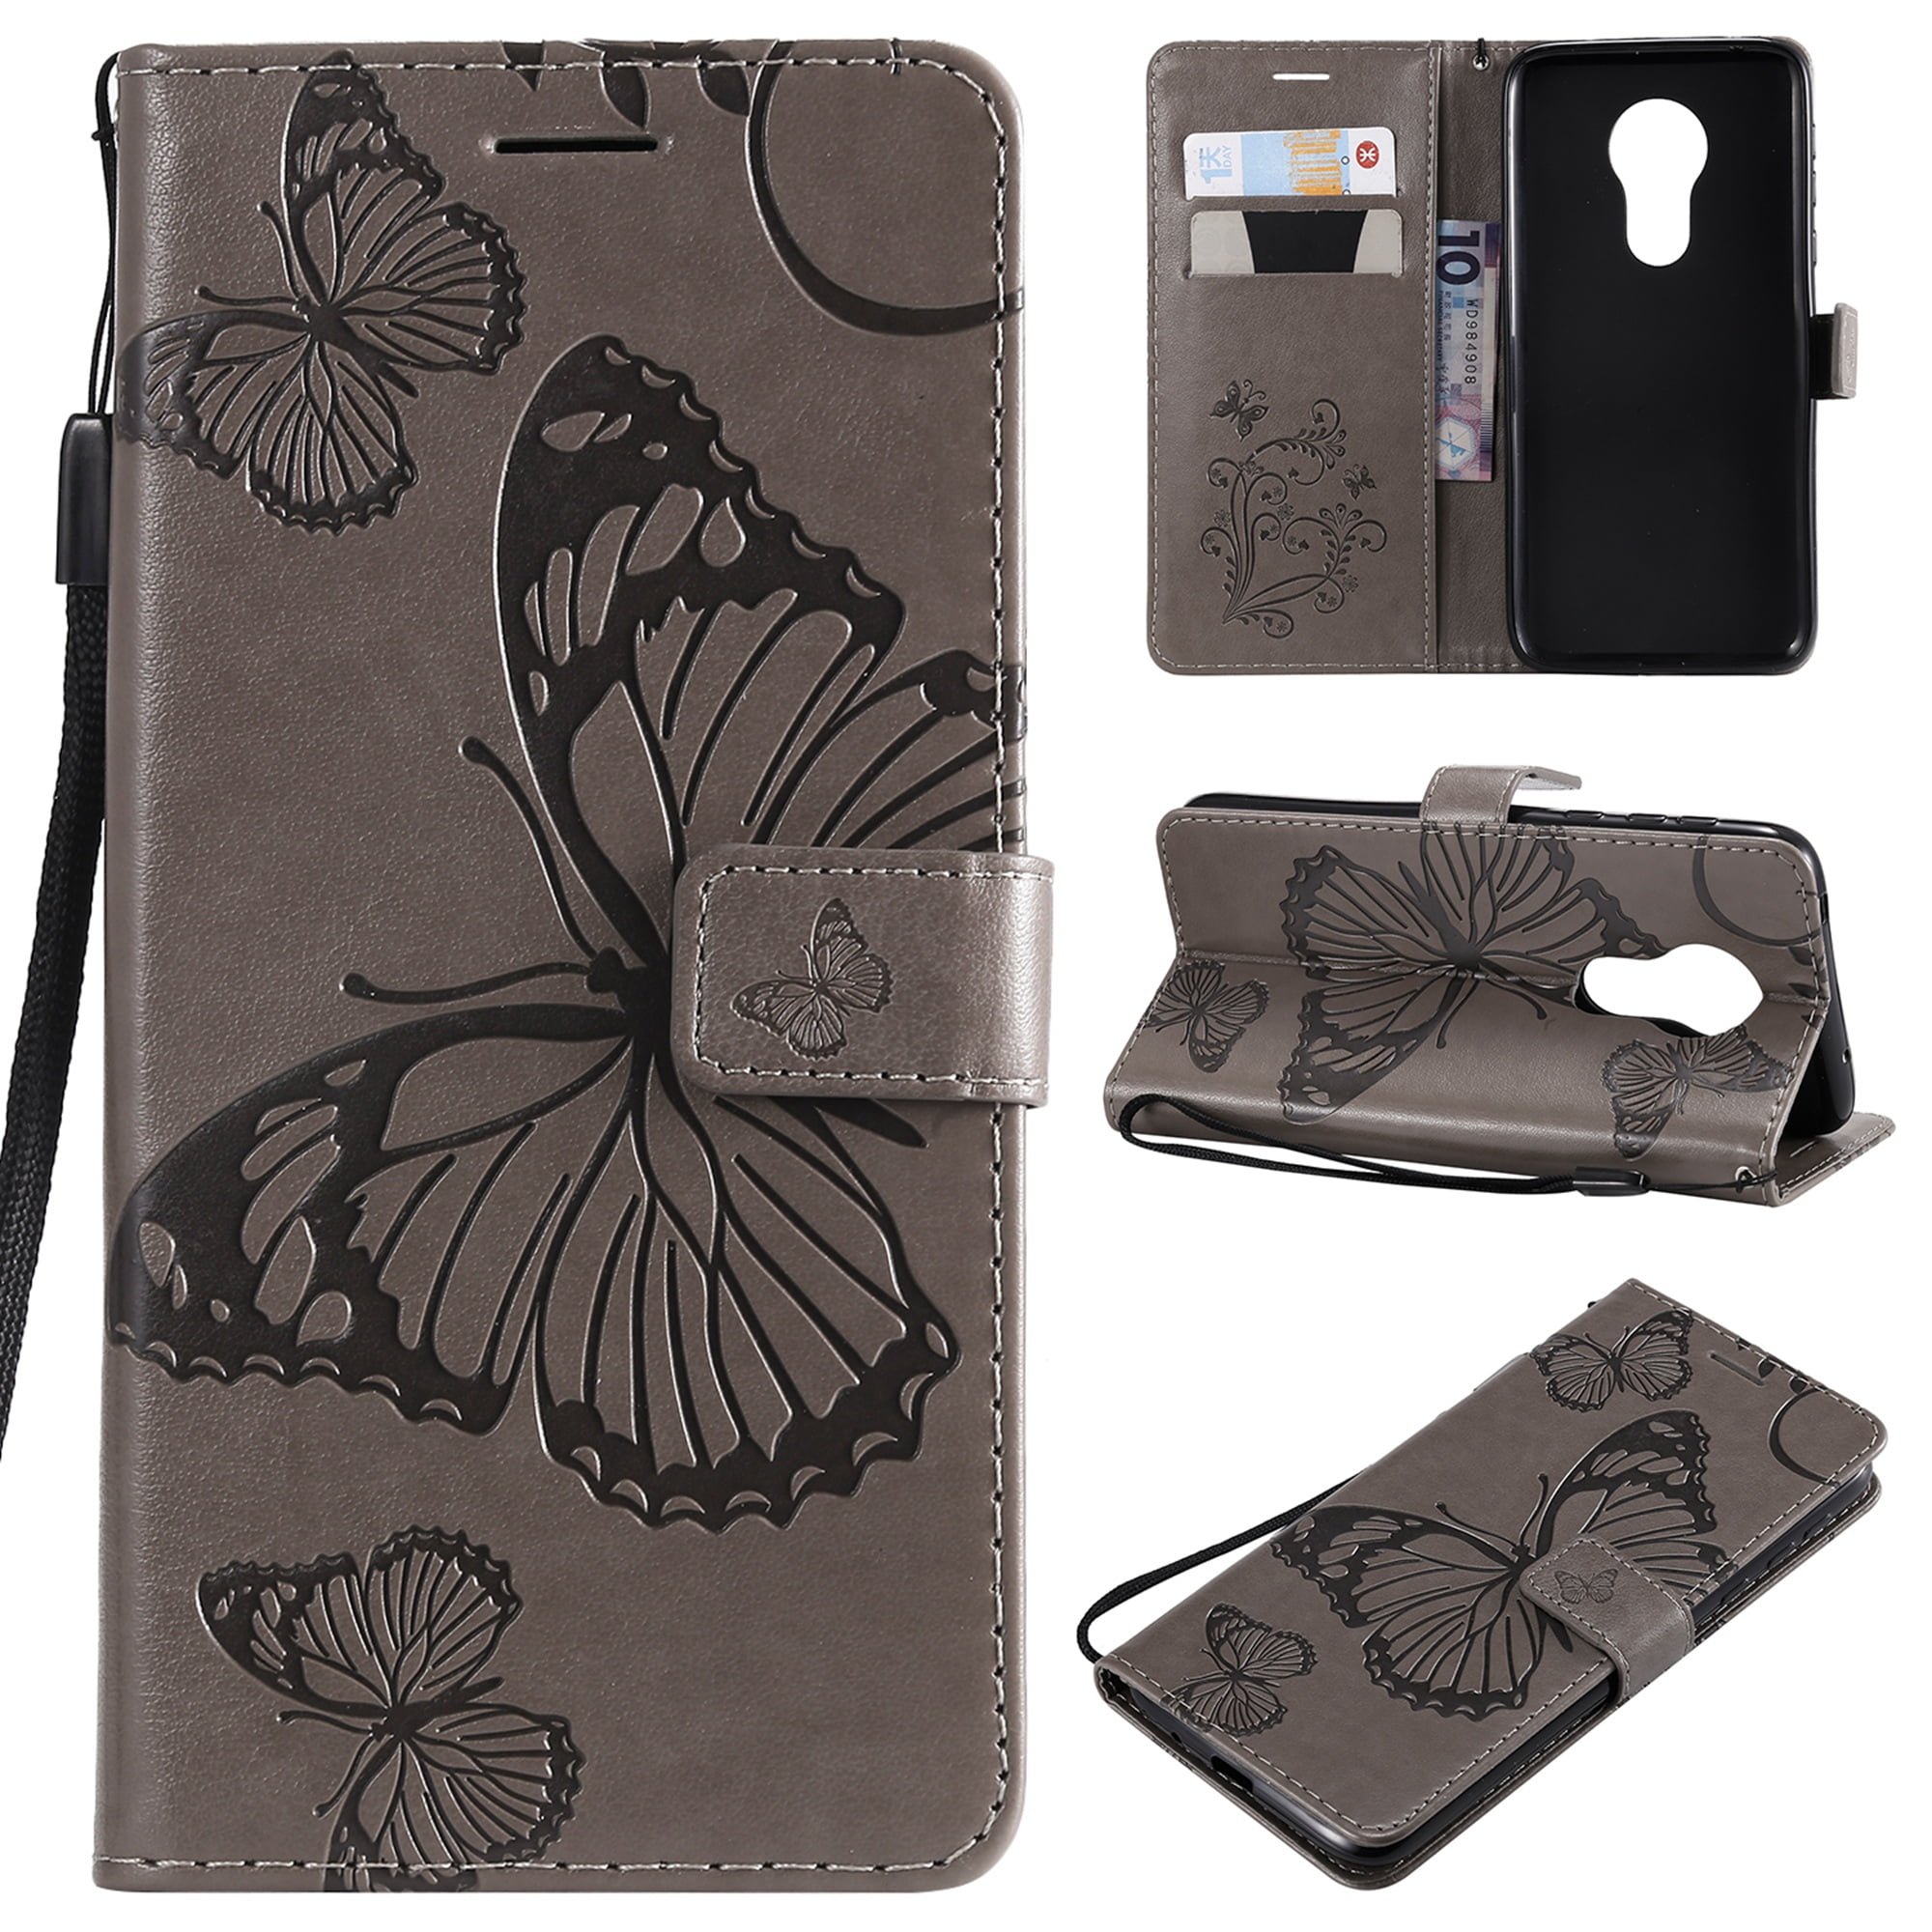 Moto G7 Case,Moto G7 Plus Case,Wallet Case,PU Leather Case Floral Tree Cat Embossed Purse with Kickstand Flip Cover Card Holders Hand Strap for Motorola Moto G7/G7 Plus Gold 